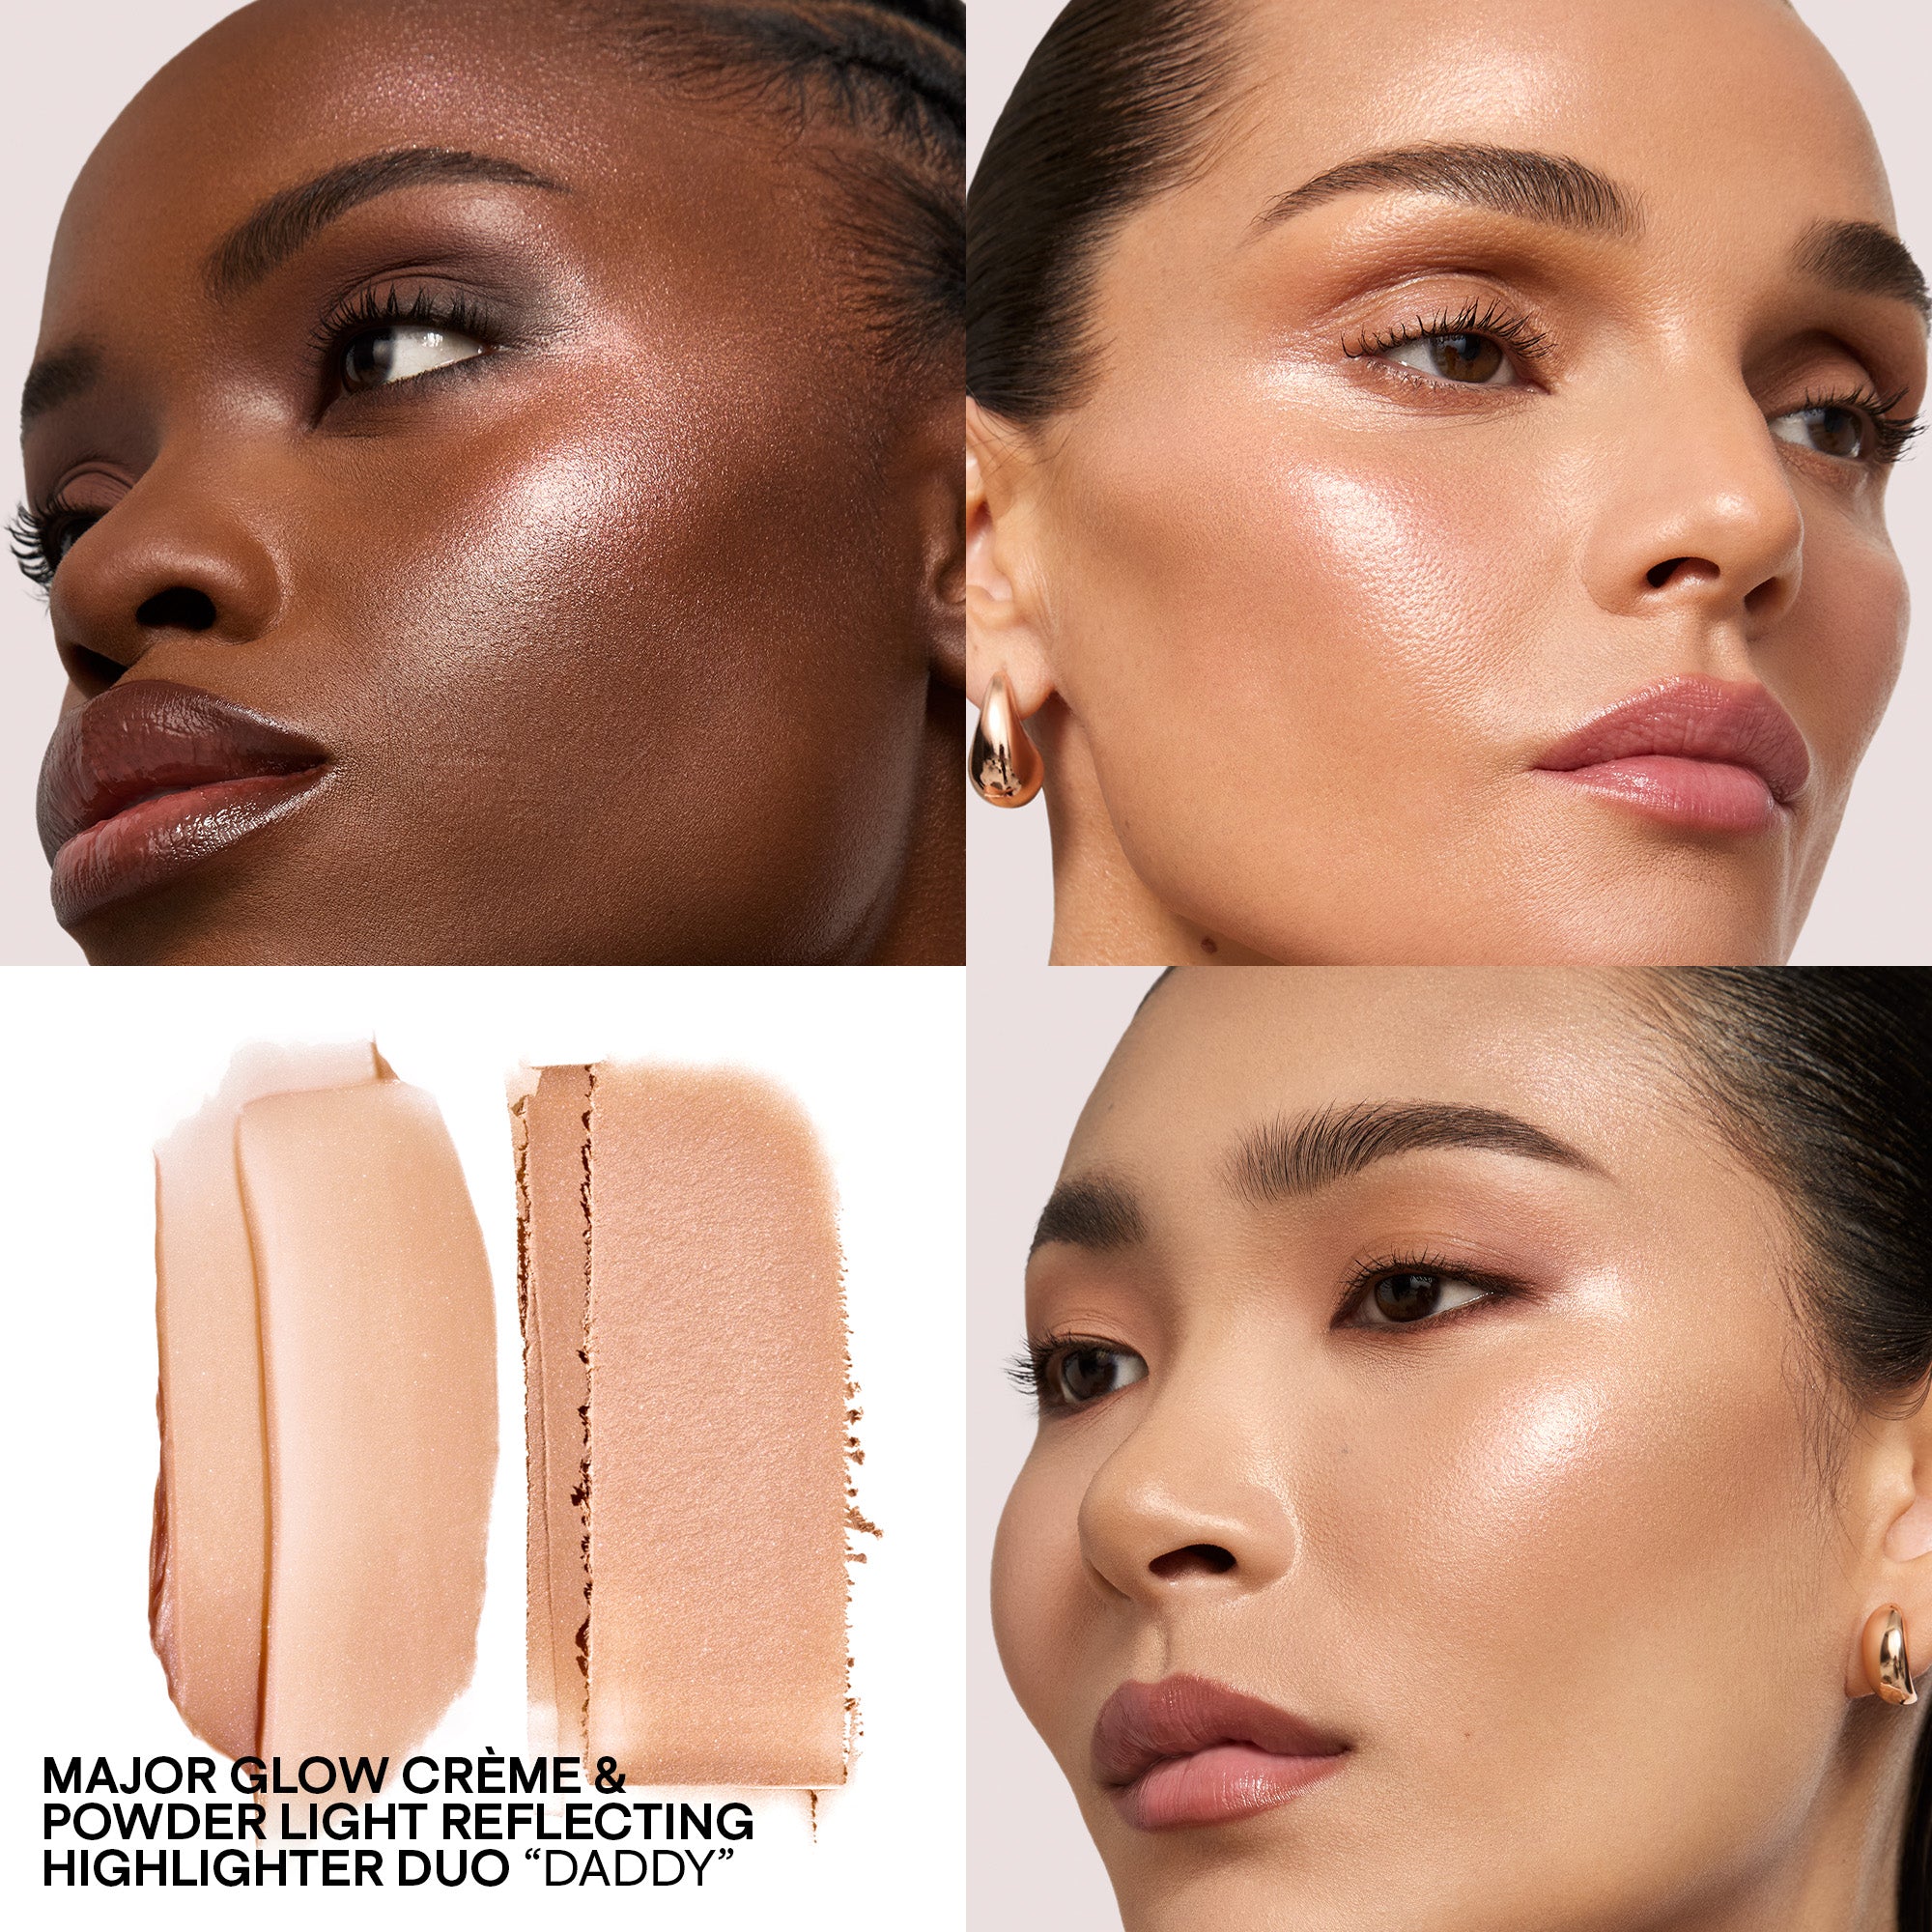 Major Glow Crème & Powder Light Reflecting Translucent Highlighter Duo (Daddy)